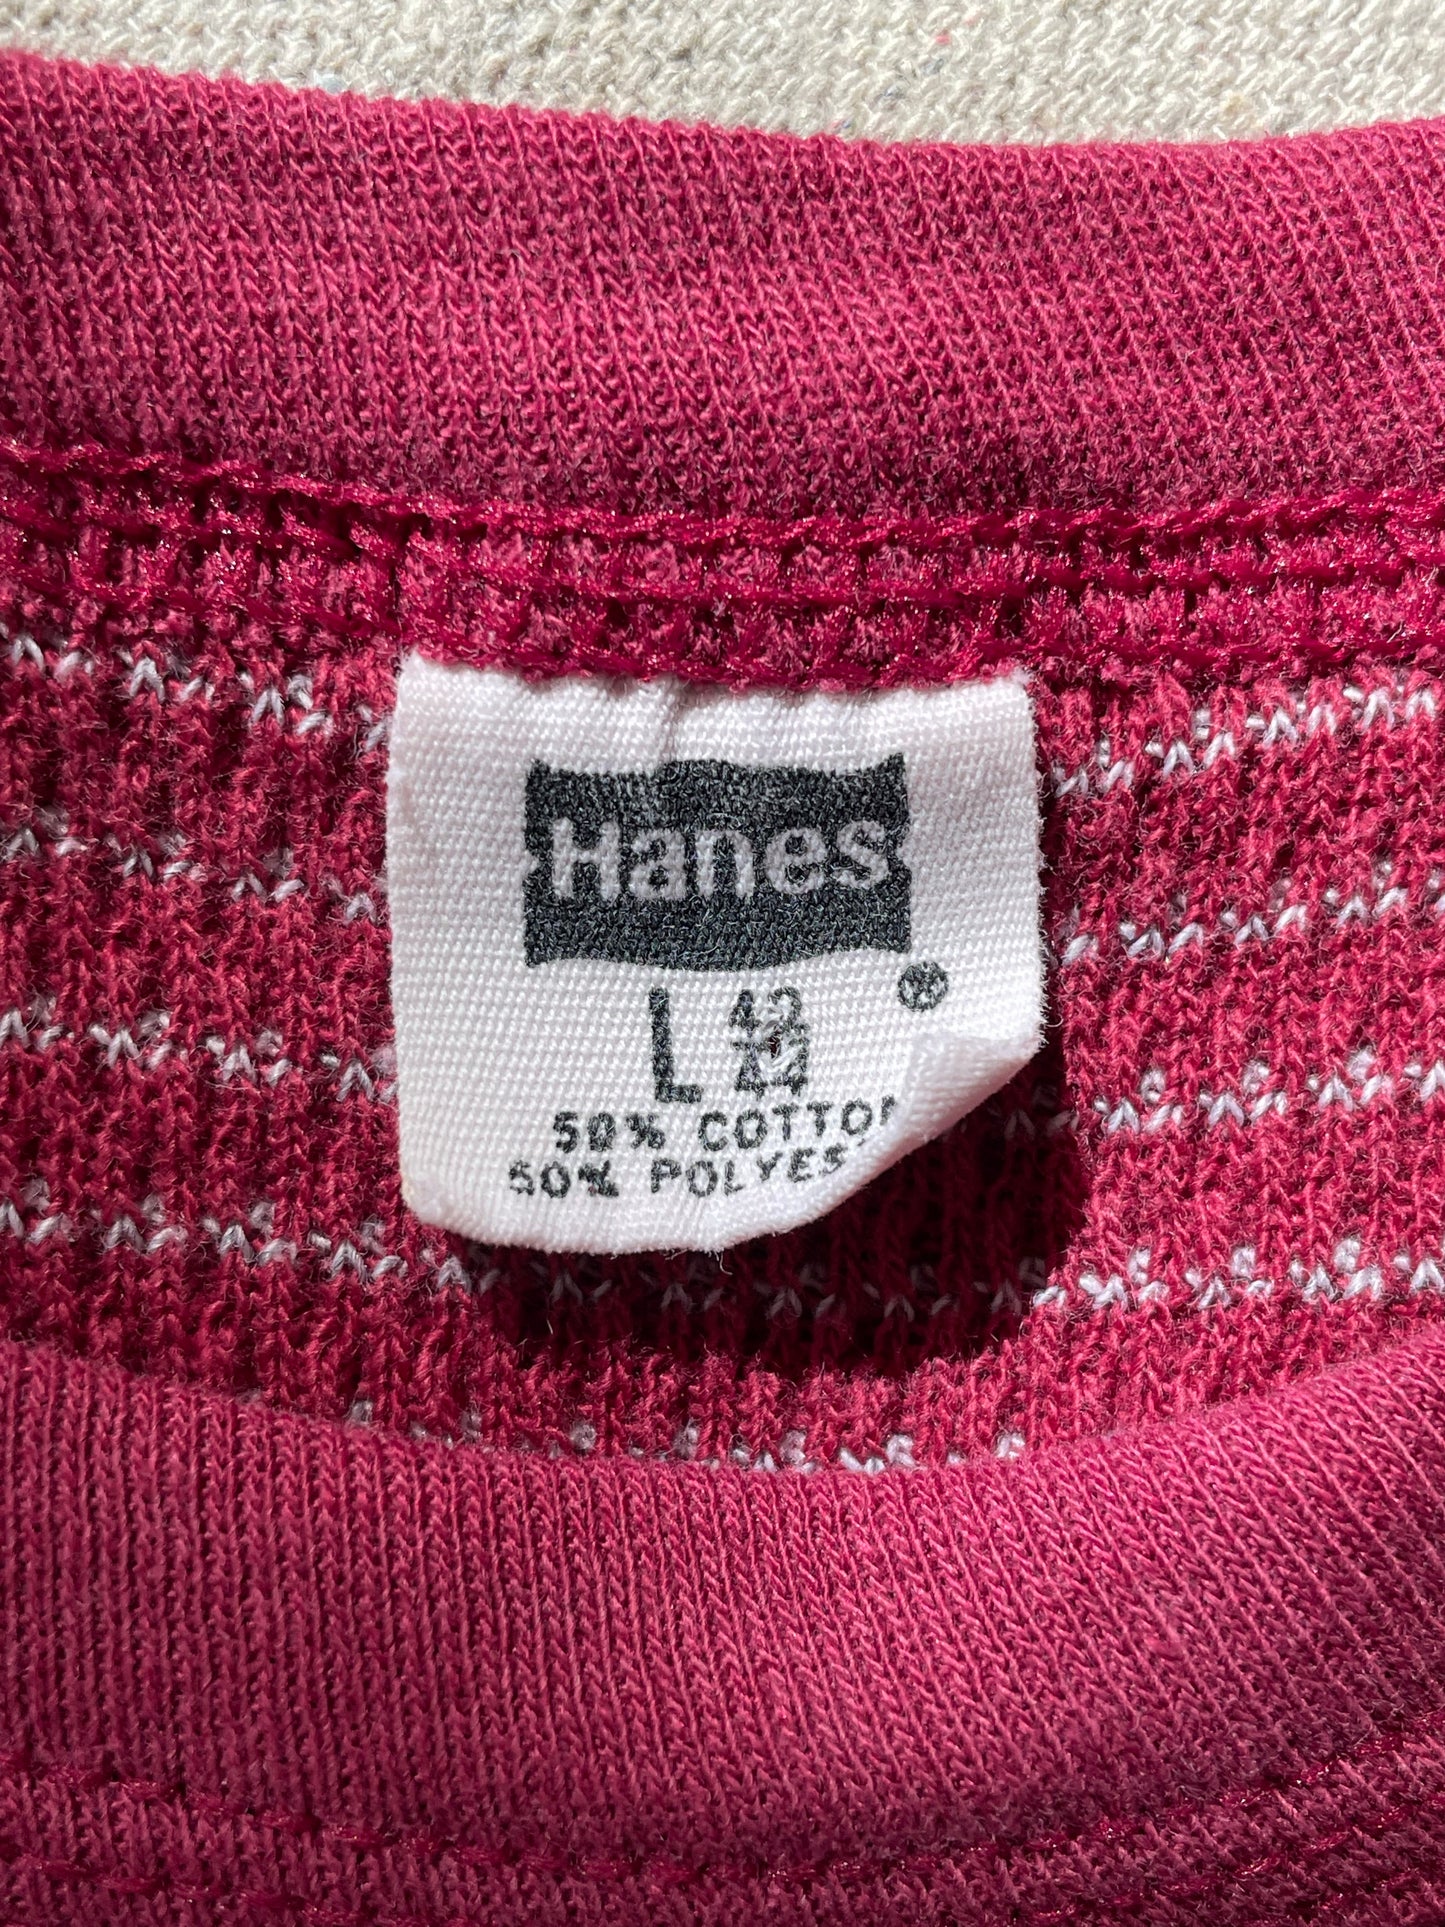 70s Hanes Striped Thermal Shirt